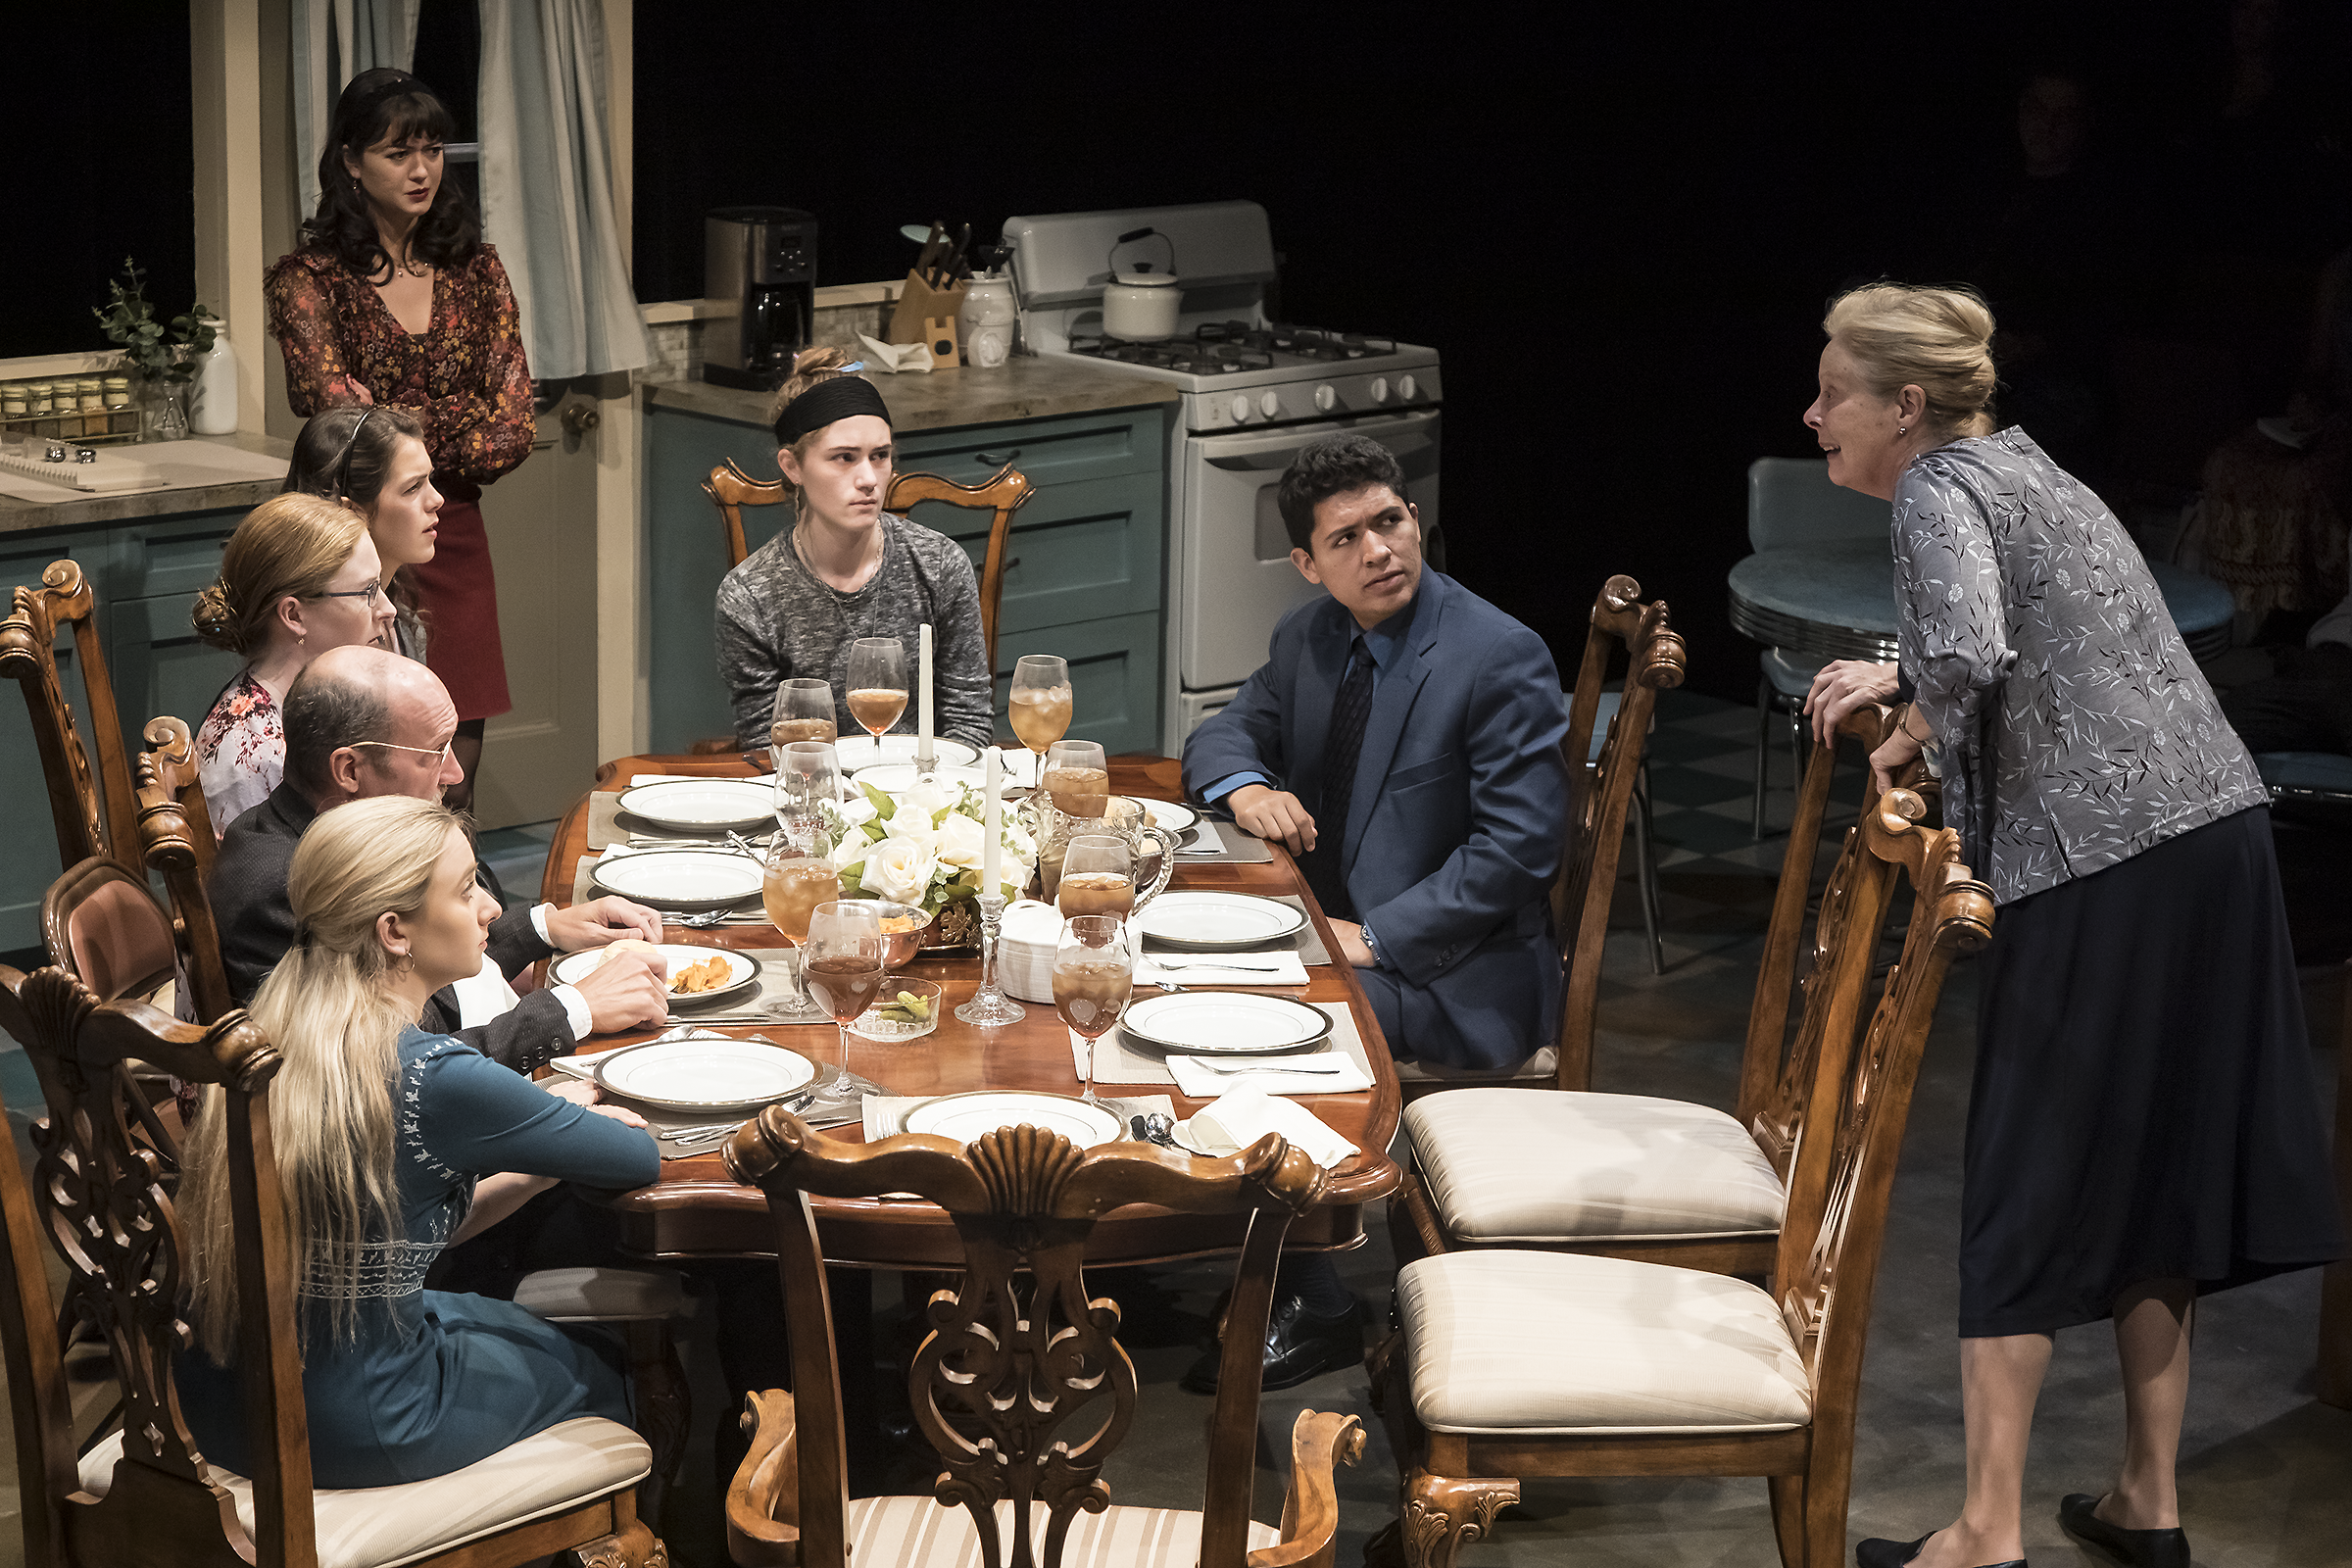 scene at the dining room table with all cast members